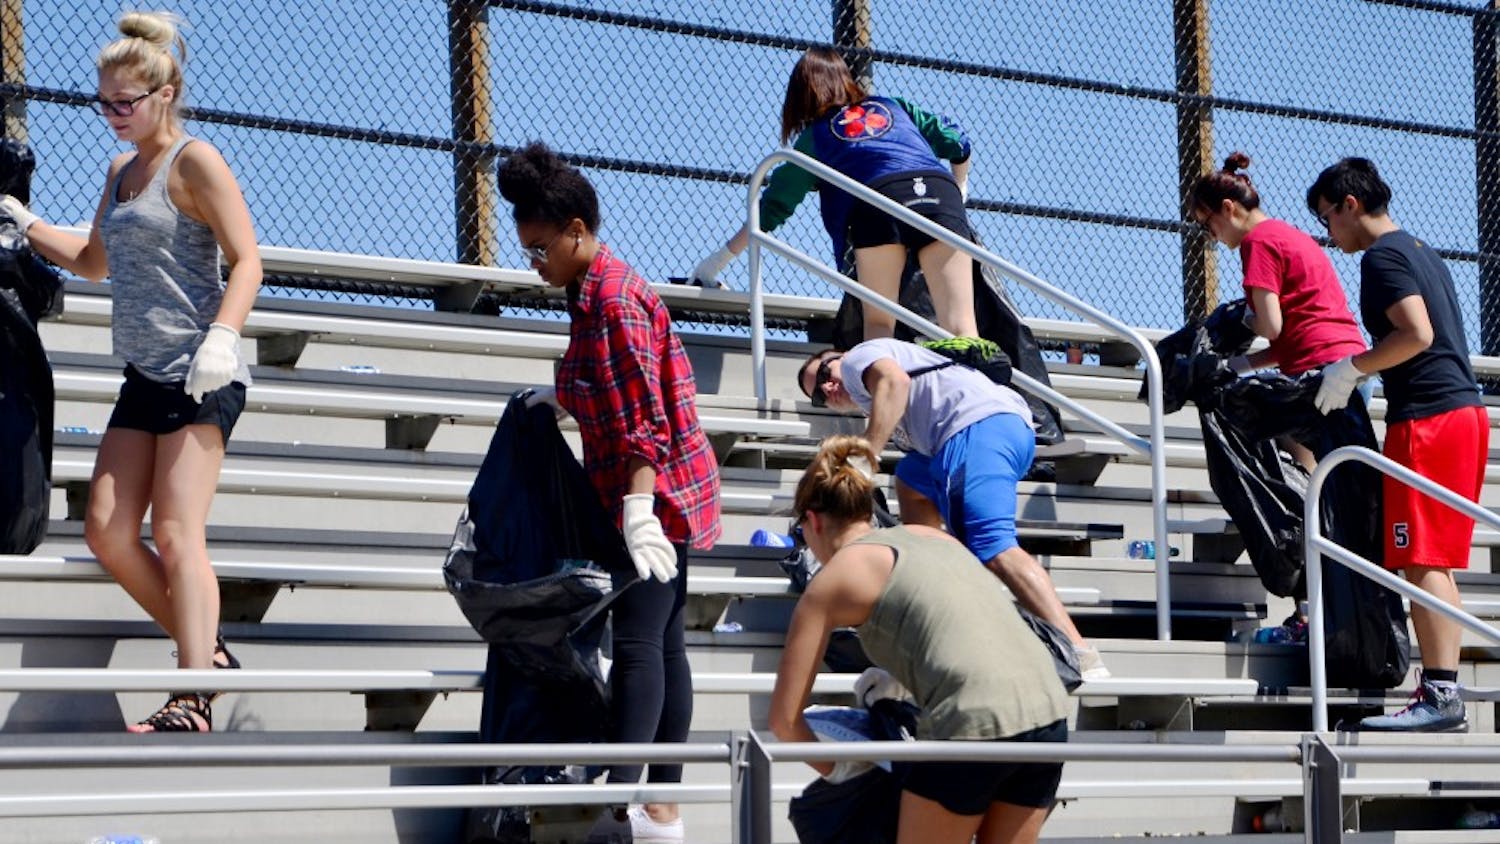 Students who have received a drinking violation ticket during the Little 500 weekend pick up trash as a part of the pretrial diversion program in 2016 at Bill Armstrong Stadium. Little 500 will take place this coming weekend with the women's race Friday at 4 p.m. and the men's race Saturday at 2 p.m.